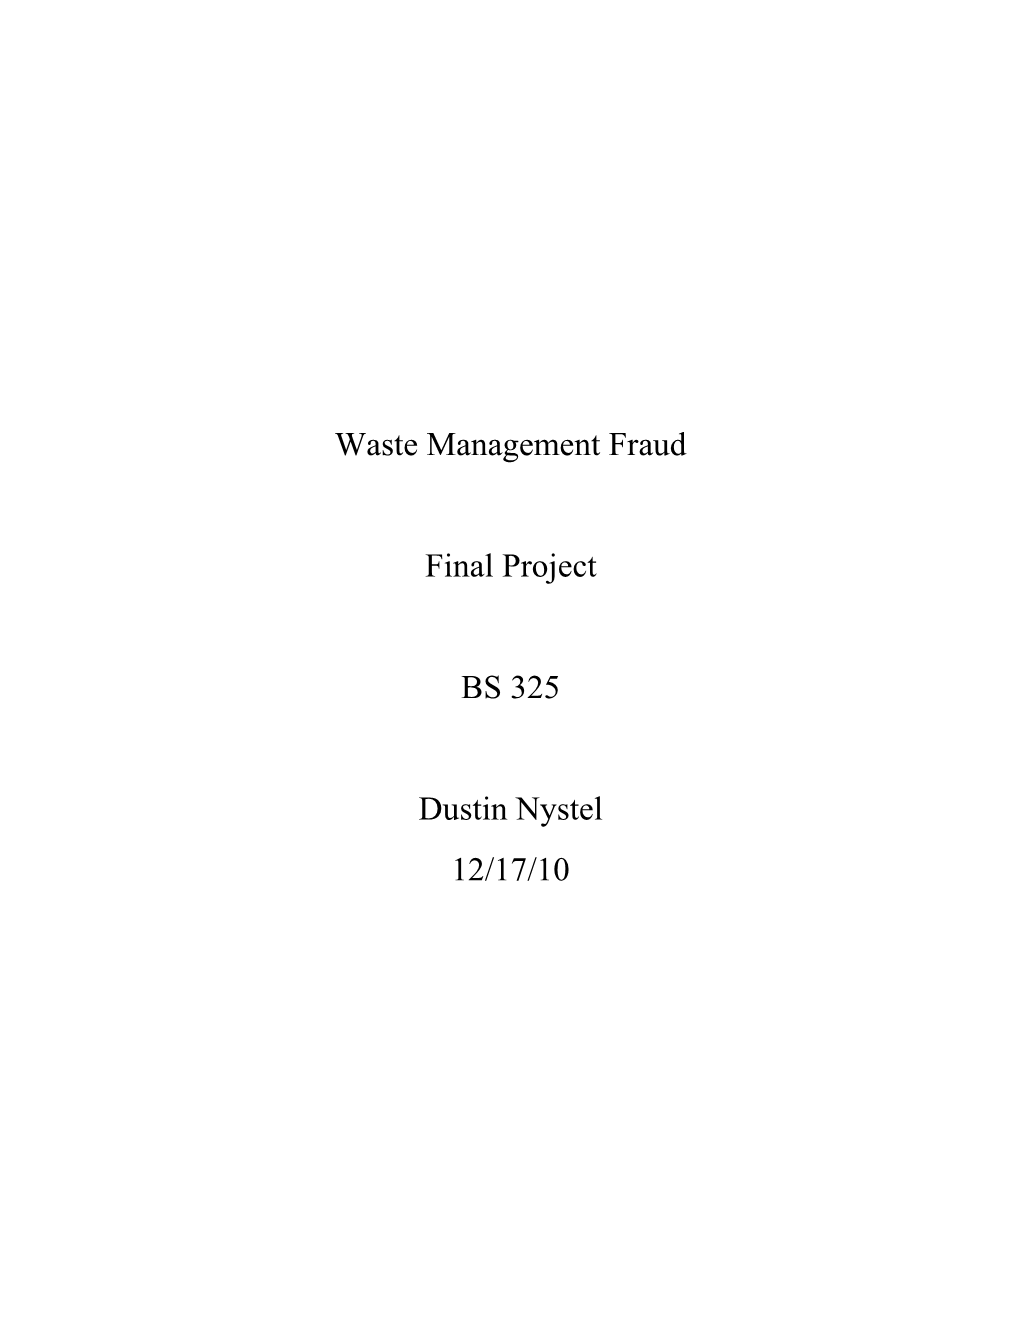 Waste Management Fraud Final Project BS 325 Dustin Nystel 12/17